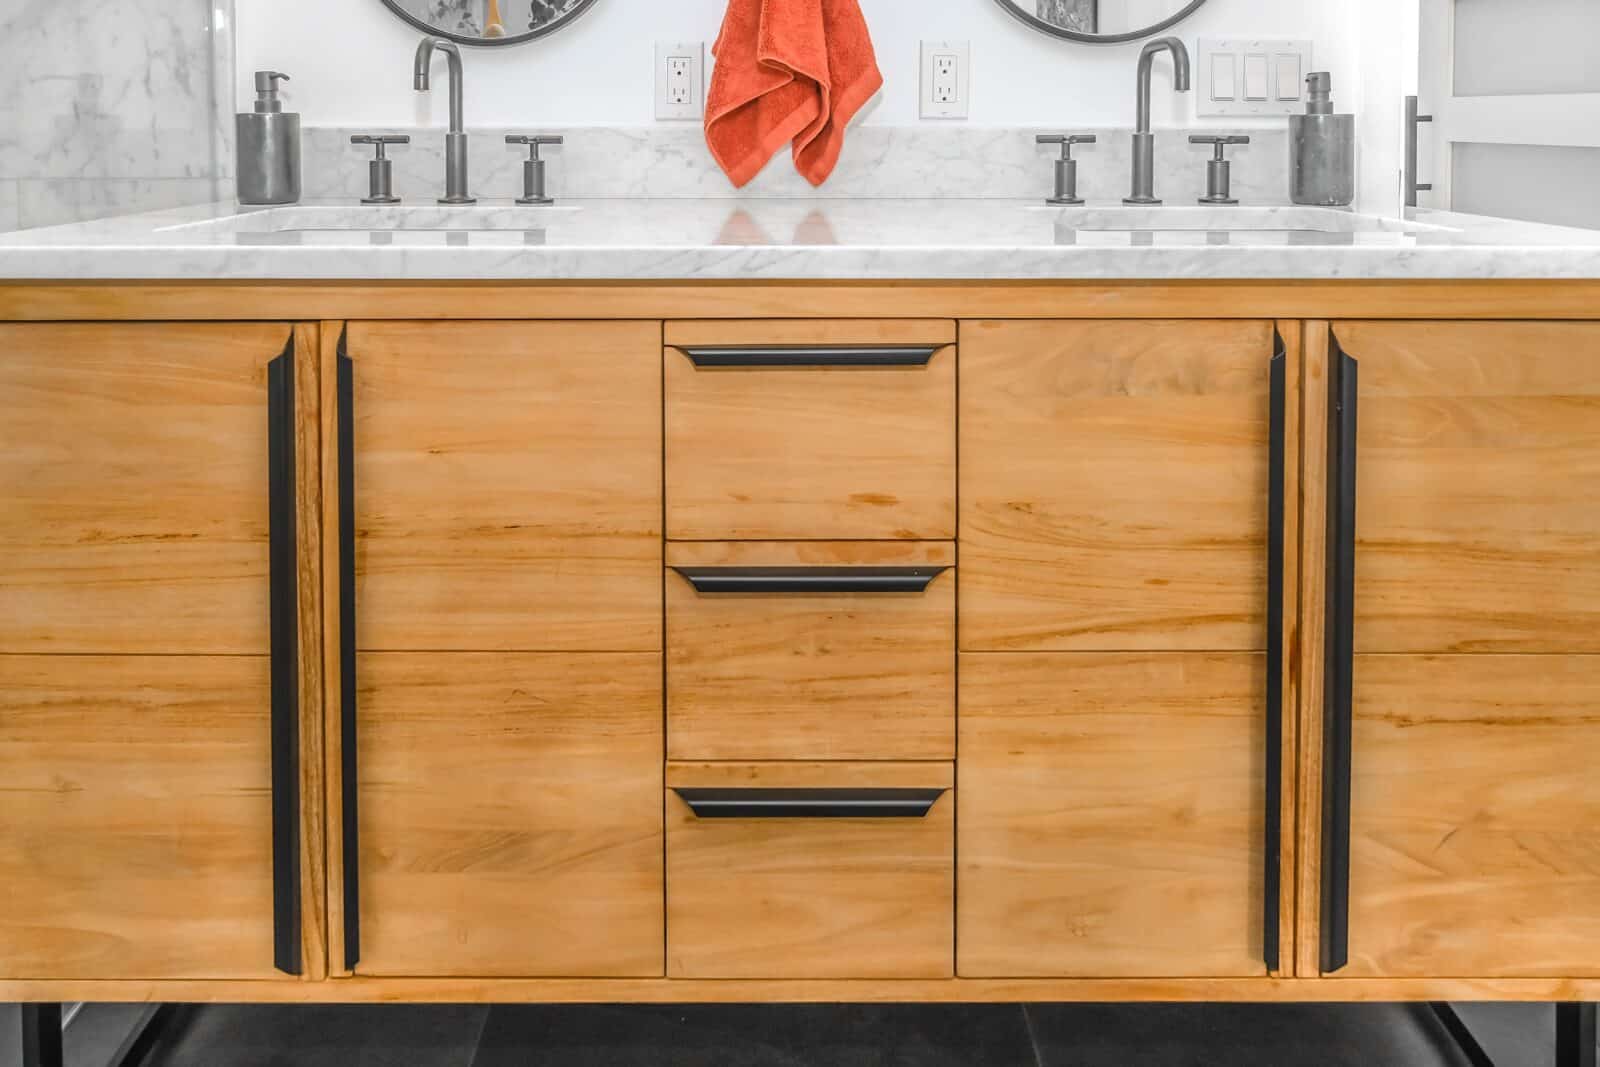 Wooden cabinets in a bathroom